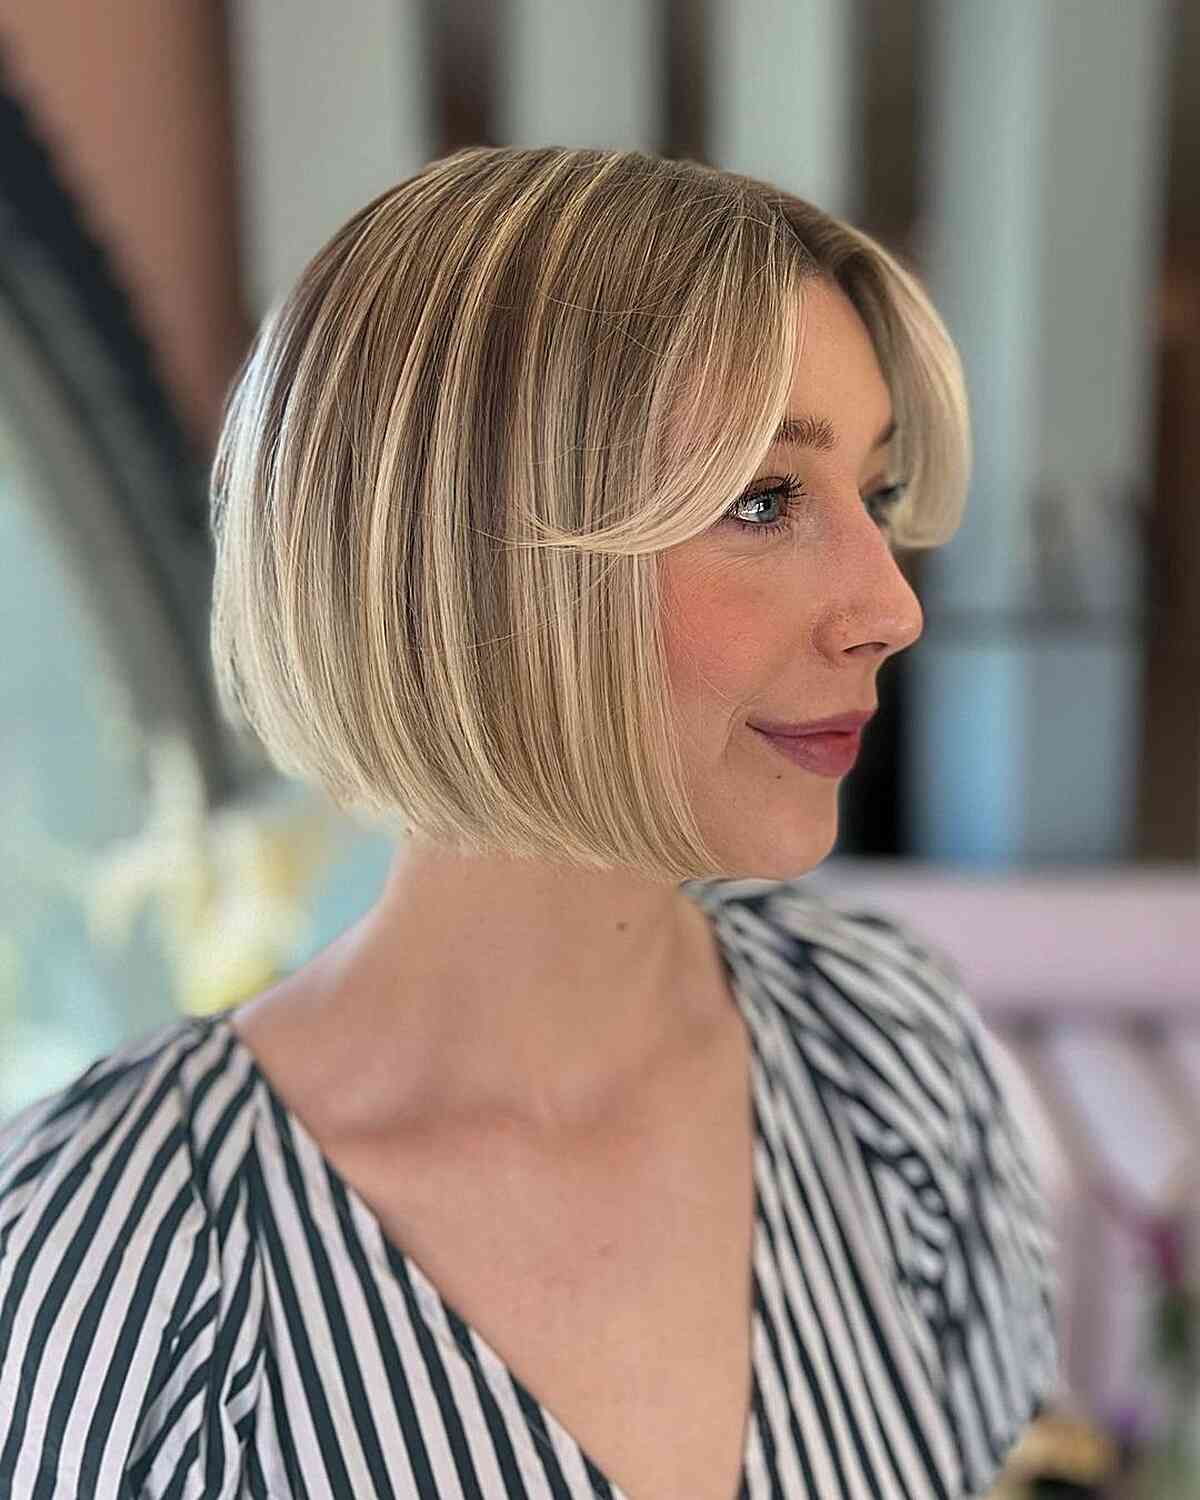 Dimensional Blunt Bob with Ombre Balayage and Bangs for women in their 40s